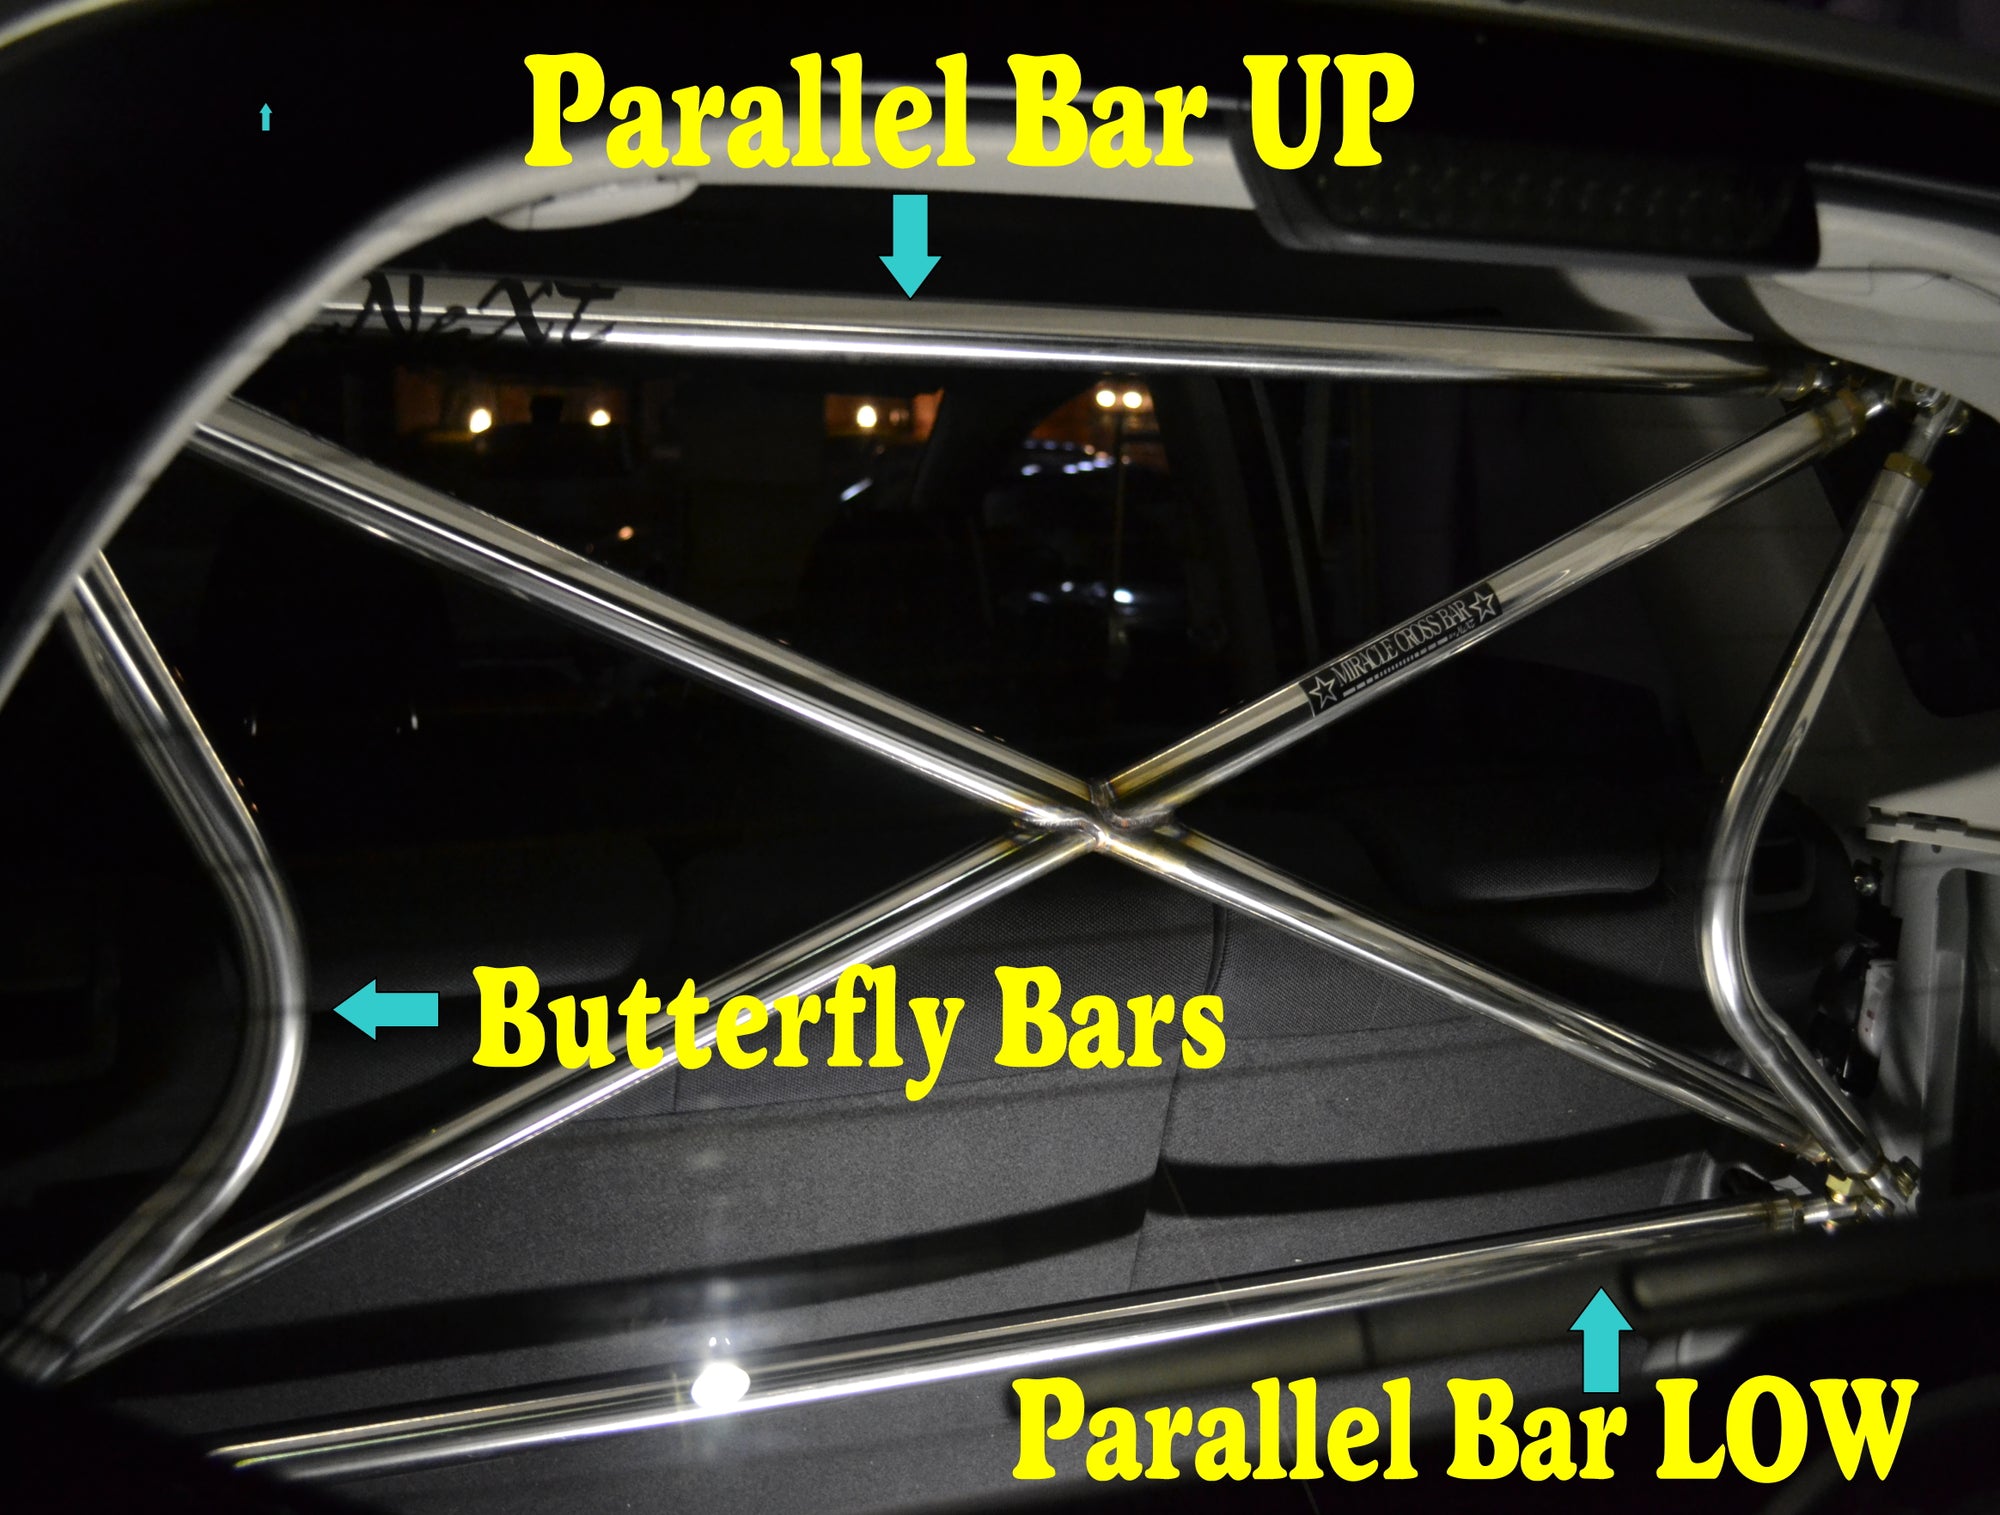 NEXT MIRACLE CROSS BAR 3 PCS SET UPGRADE KIT STAINLESS 35 FOR MAZDA RX7 FD3S NEXT-01177